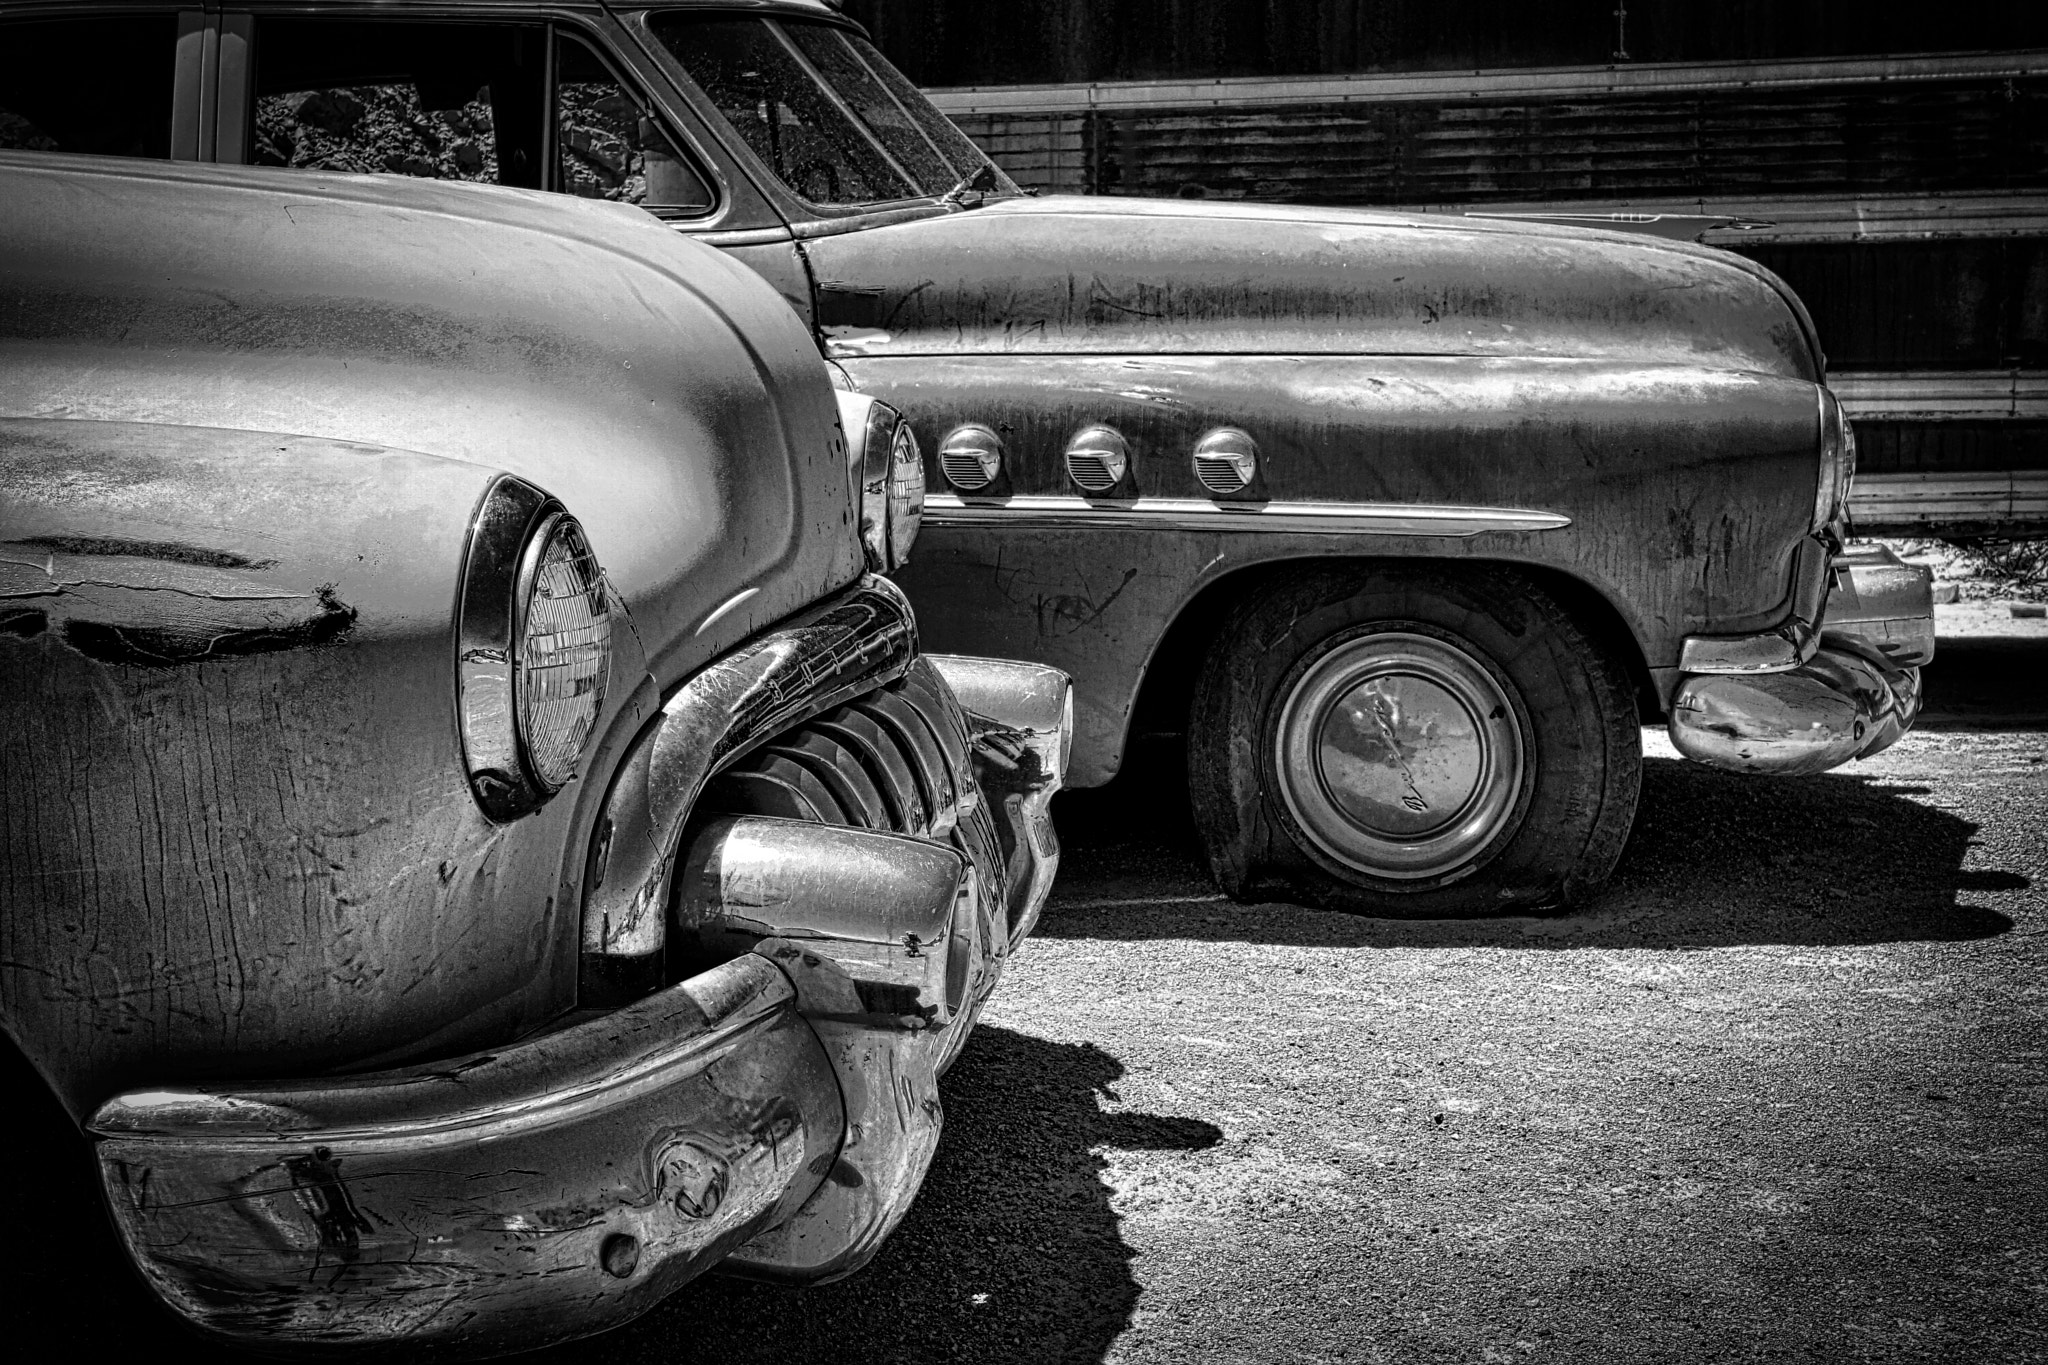 Hasselblad Lunar sample photo. Old buick's photography